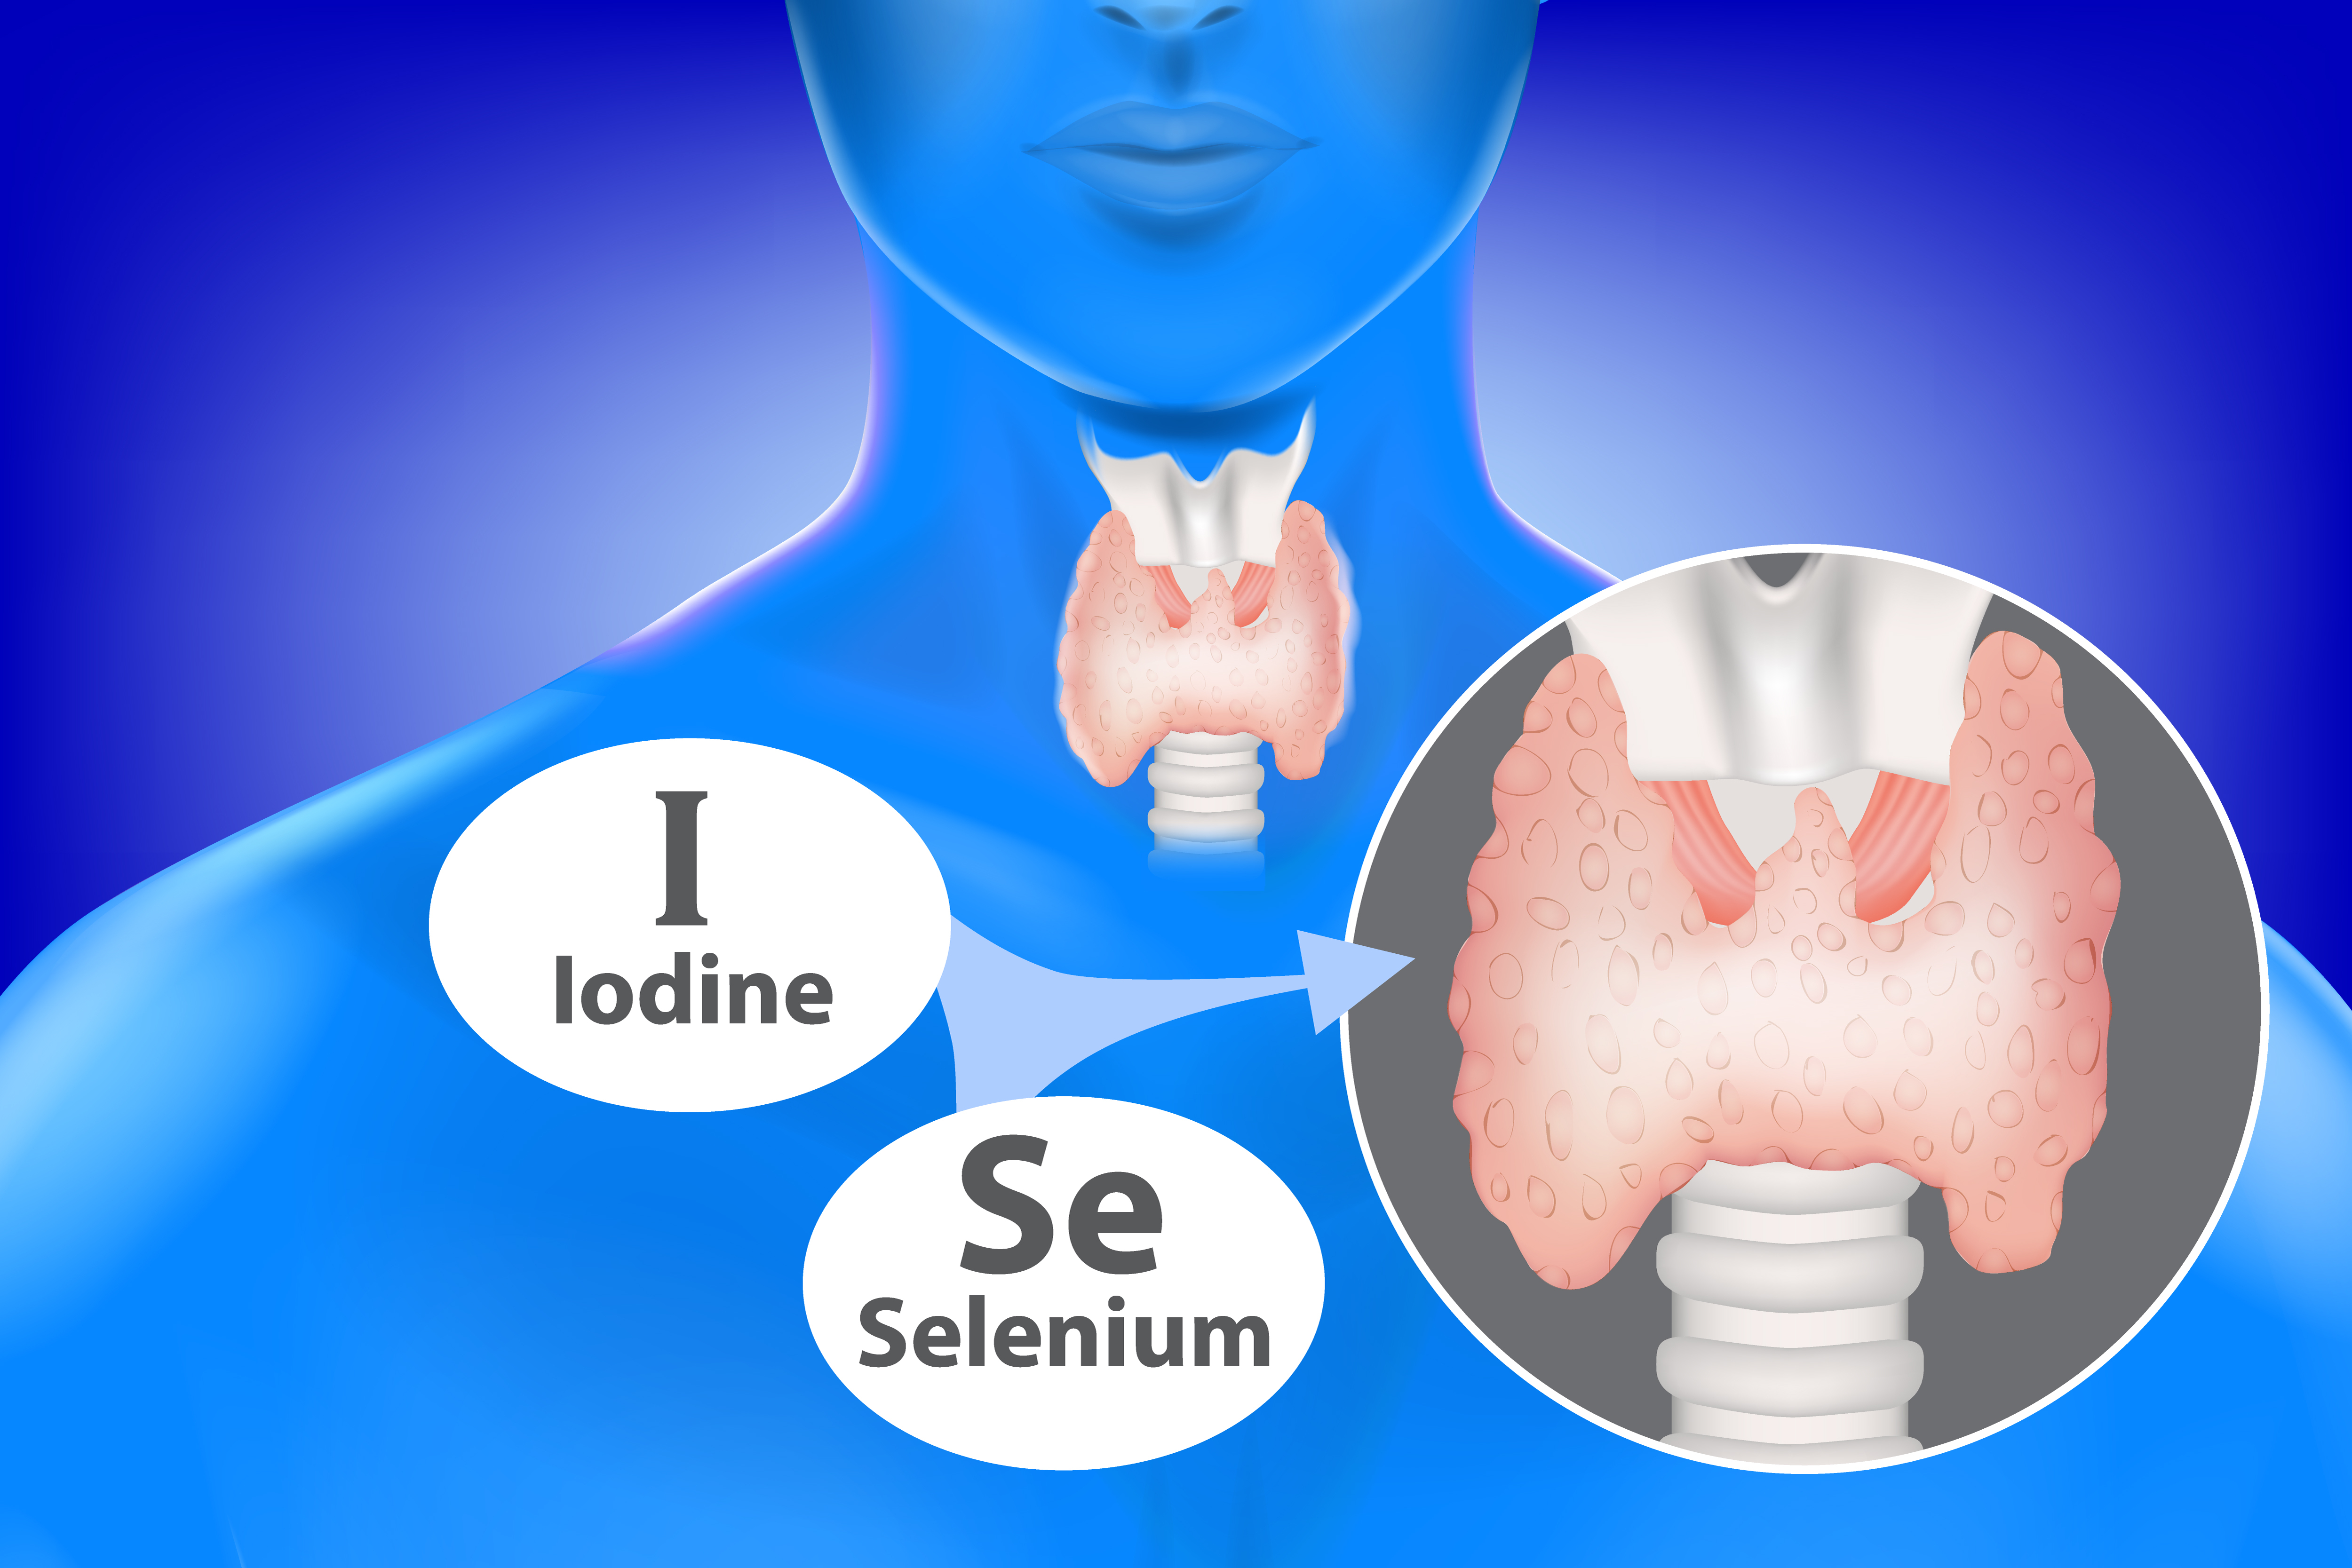 Selenium is crucial for thyroid actions